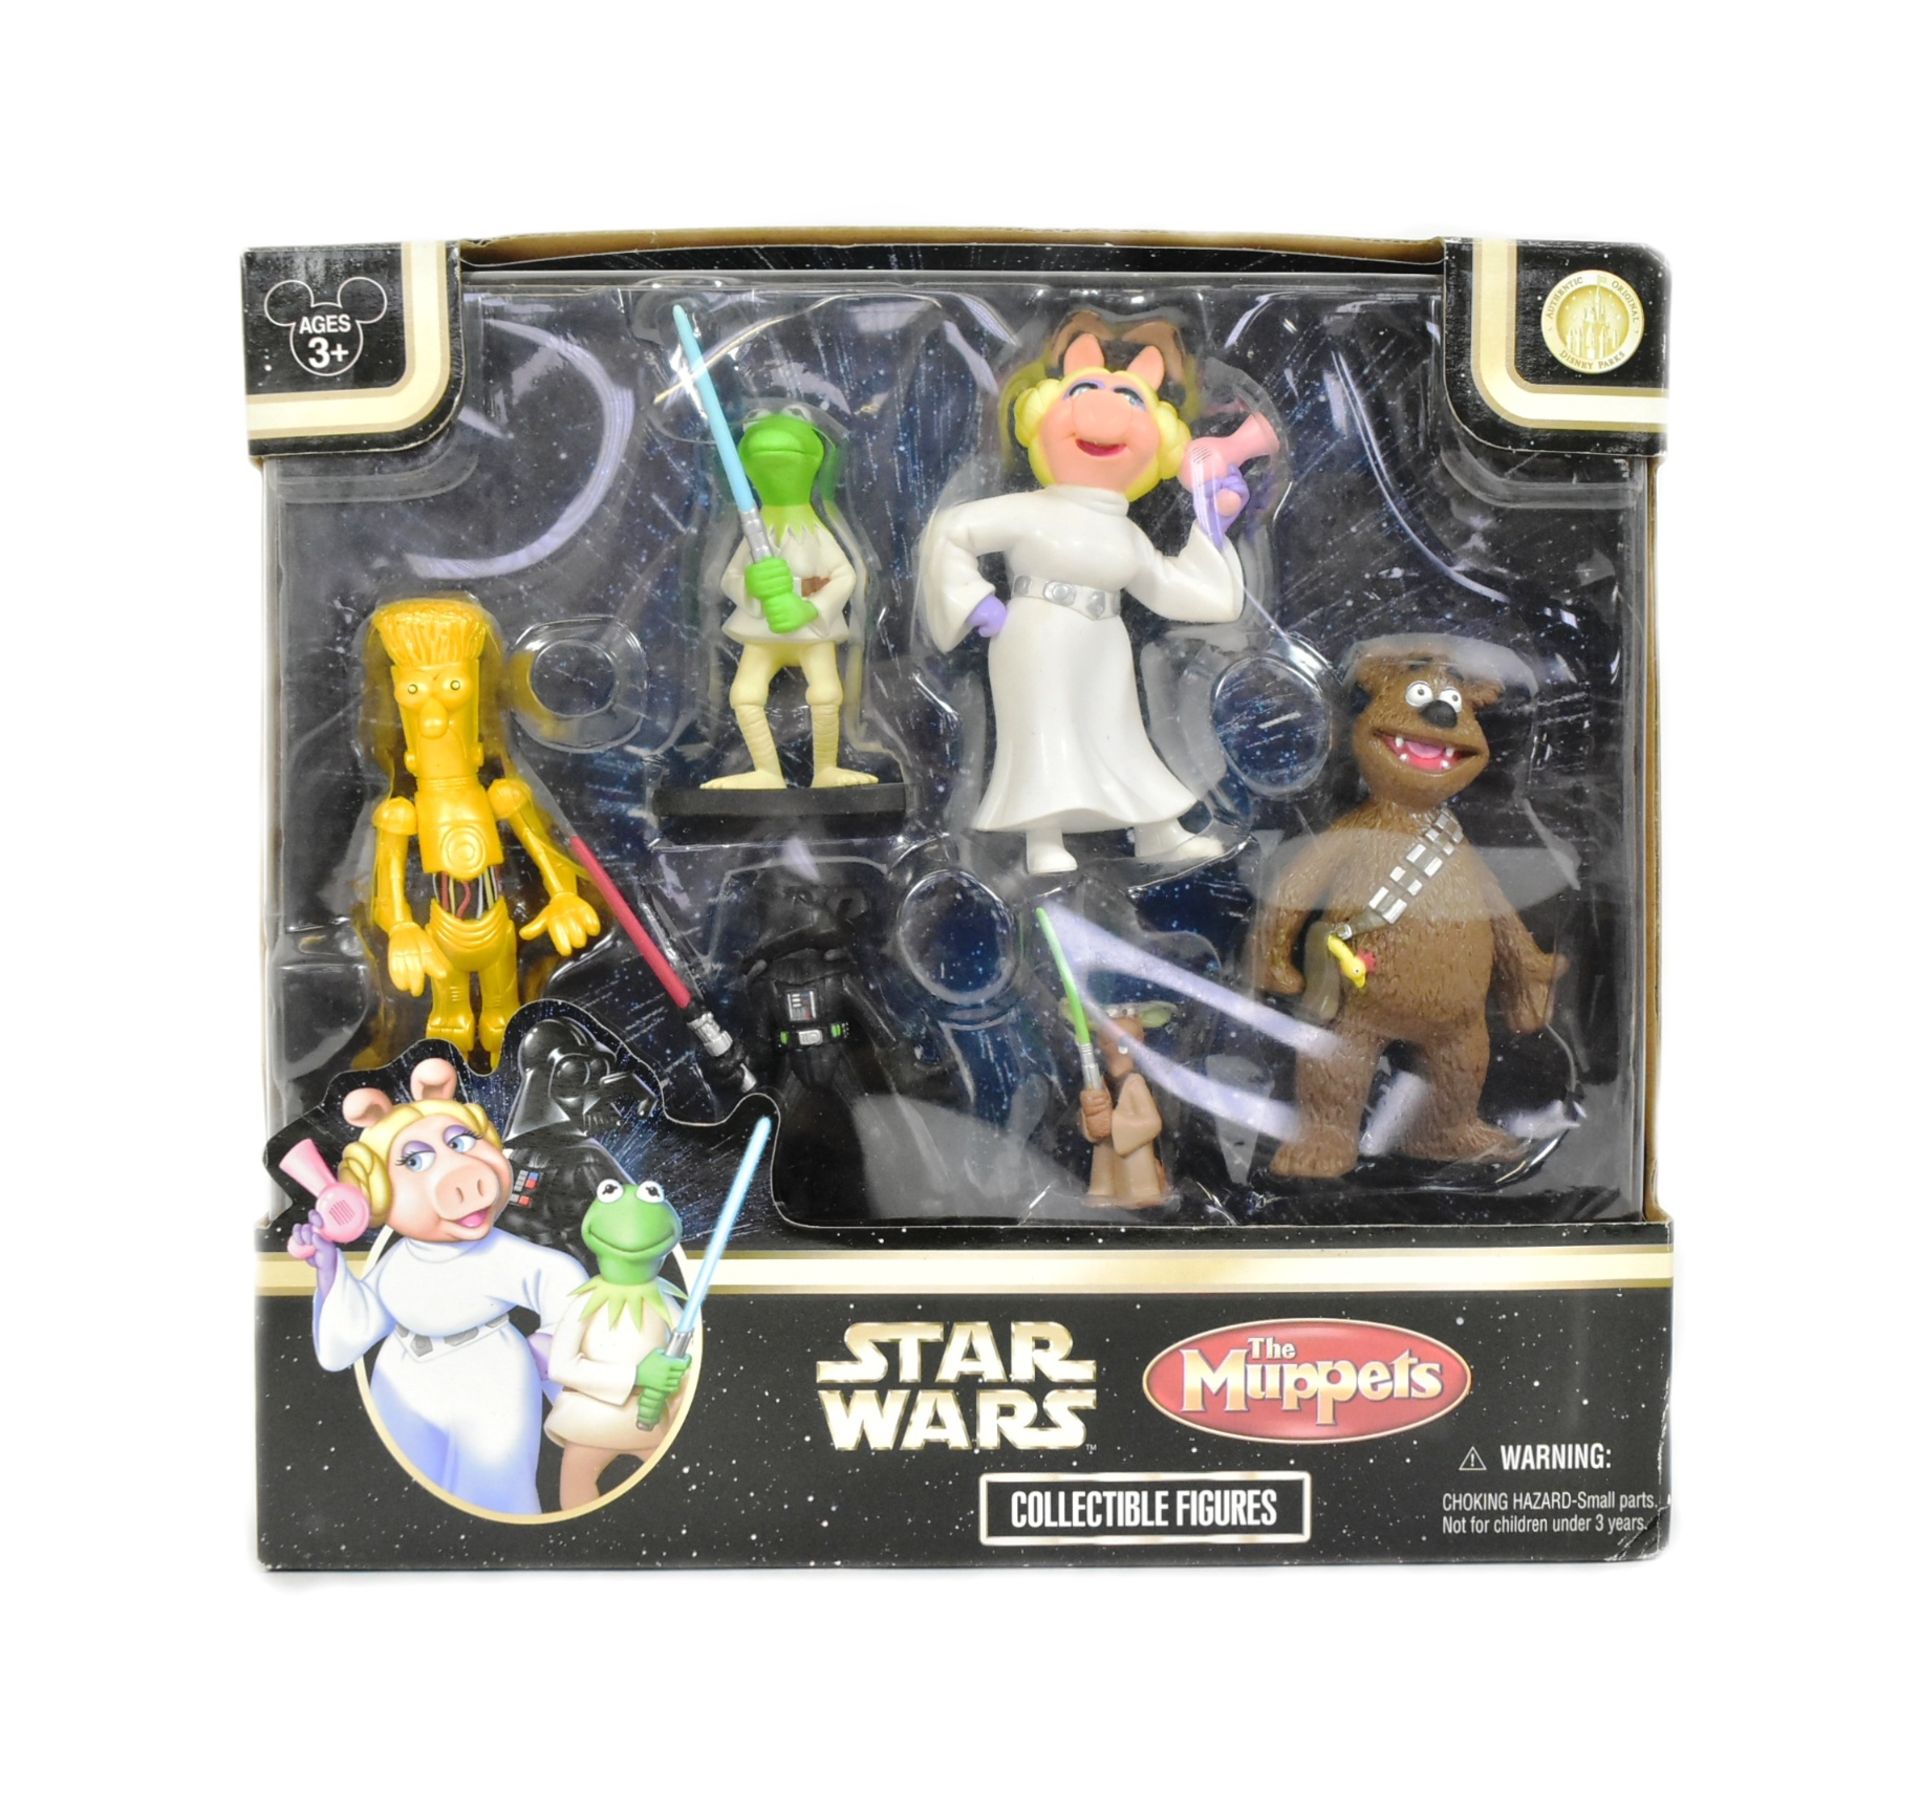 STAR WARS - MUPPETS - BOXED ACTION FIGURE SET